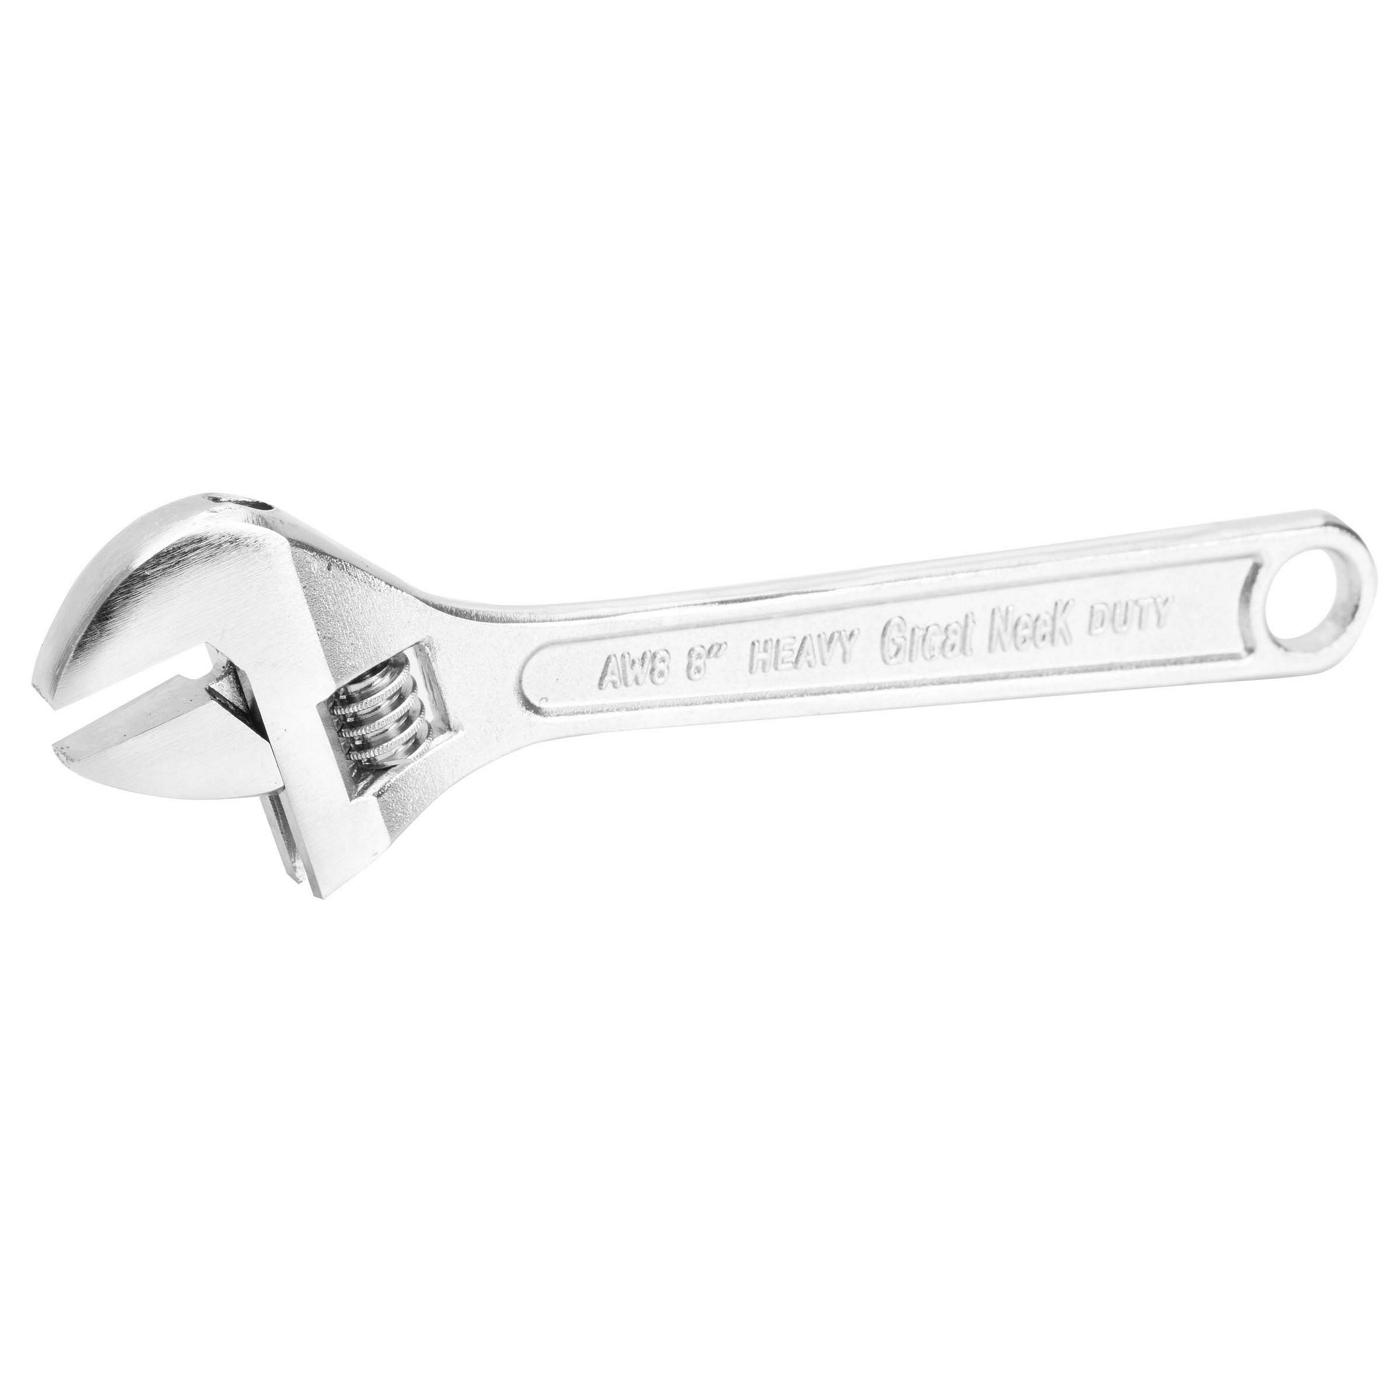 Great Neck Adjustable Wrench; image 1 of 3